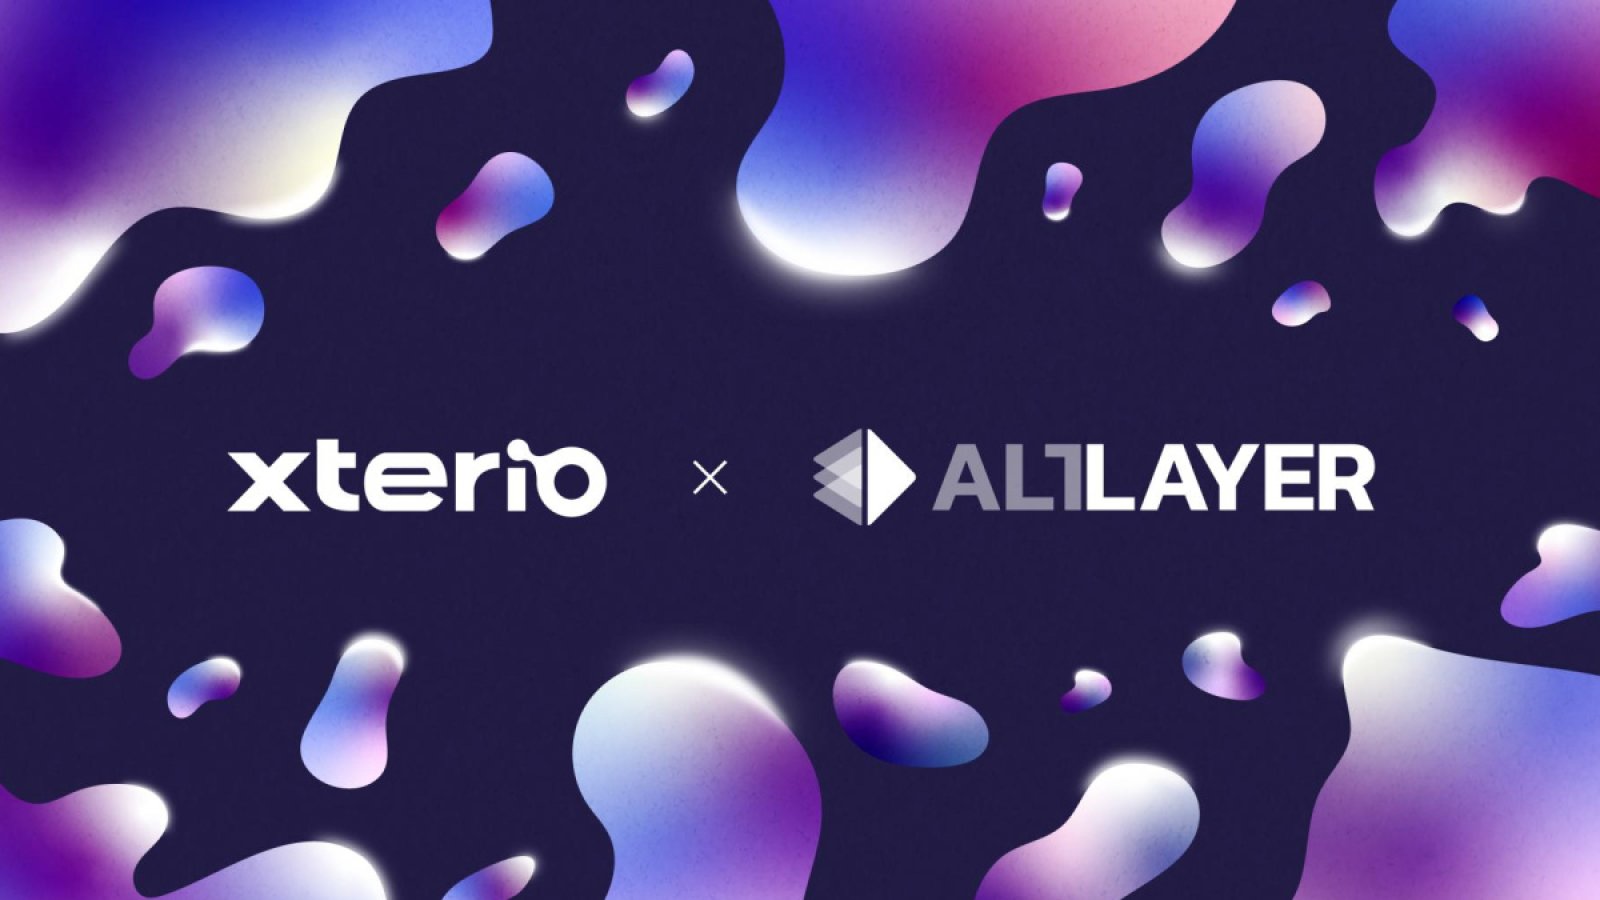 Xterio to Launch Gaming-Oriented Blockchain in Collaboration with AltLayer, aiming for Wider Web3 Gaming Adoption